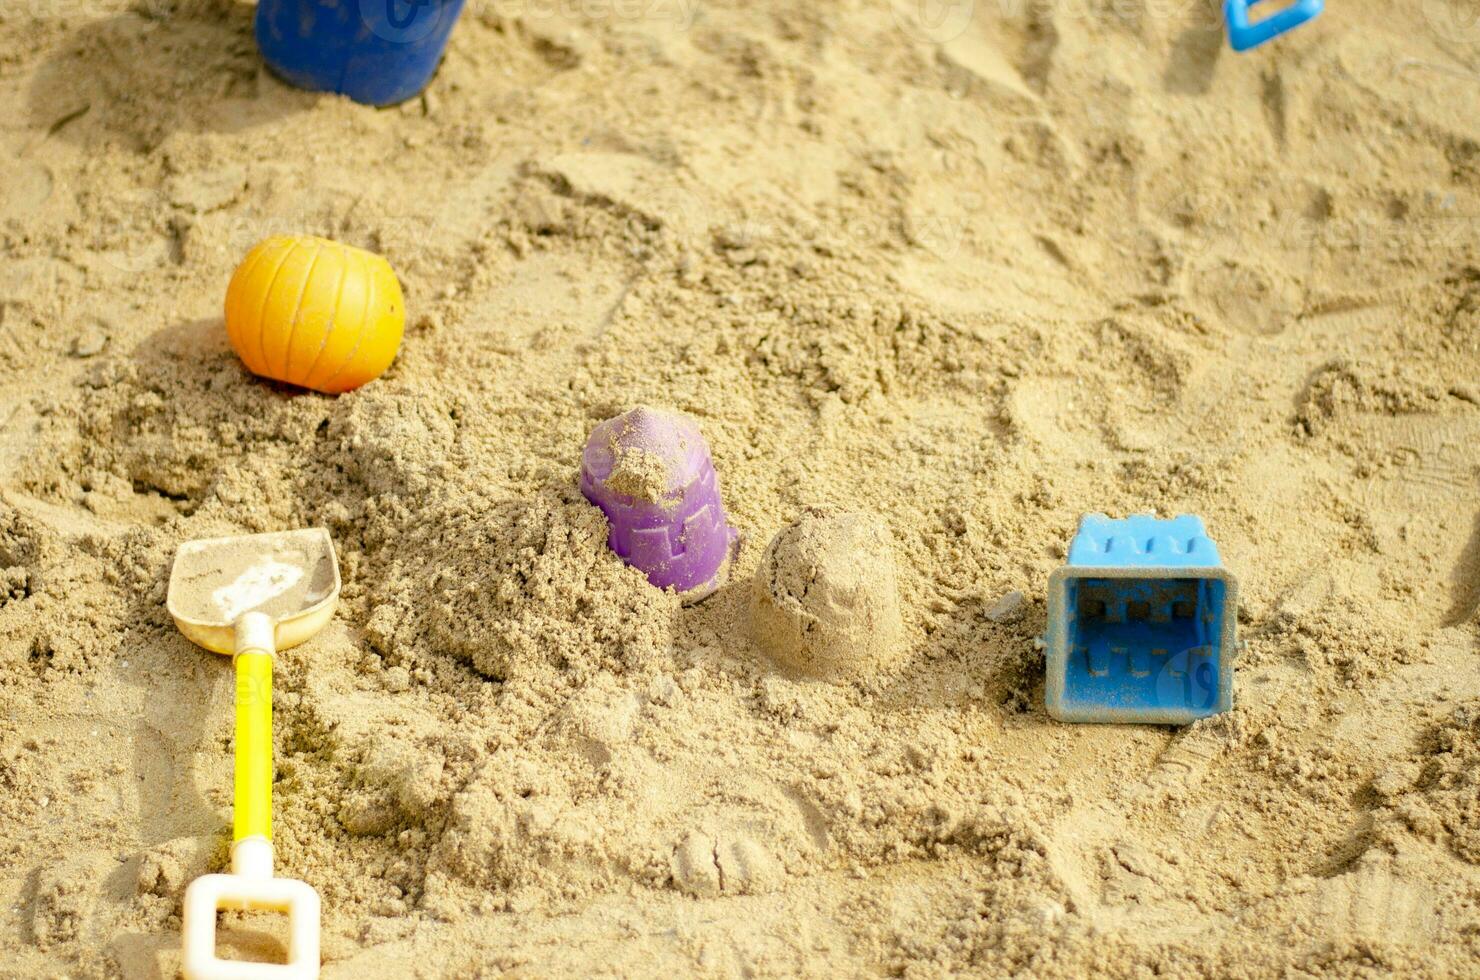 sand digging toy plastic children's toys in the sand,  beach recreation for children. photo